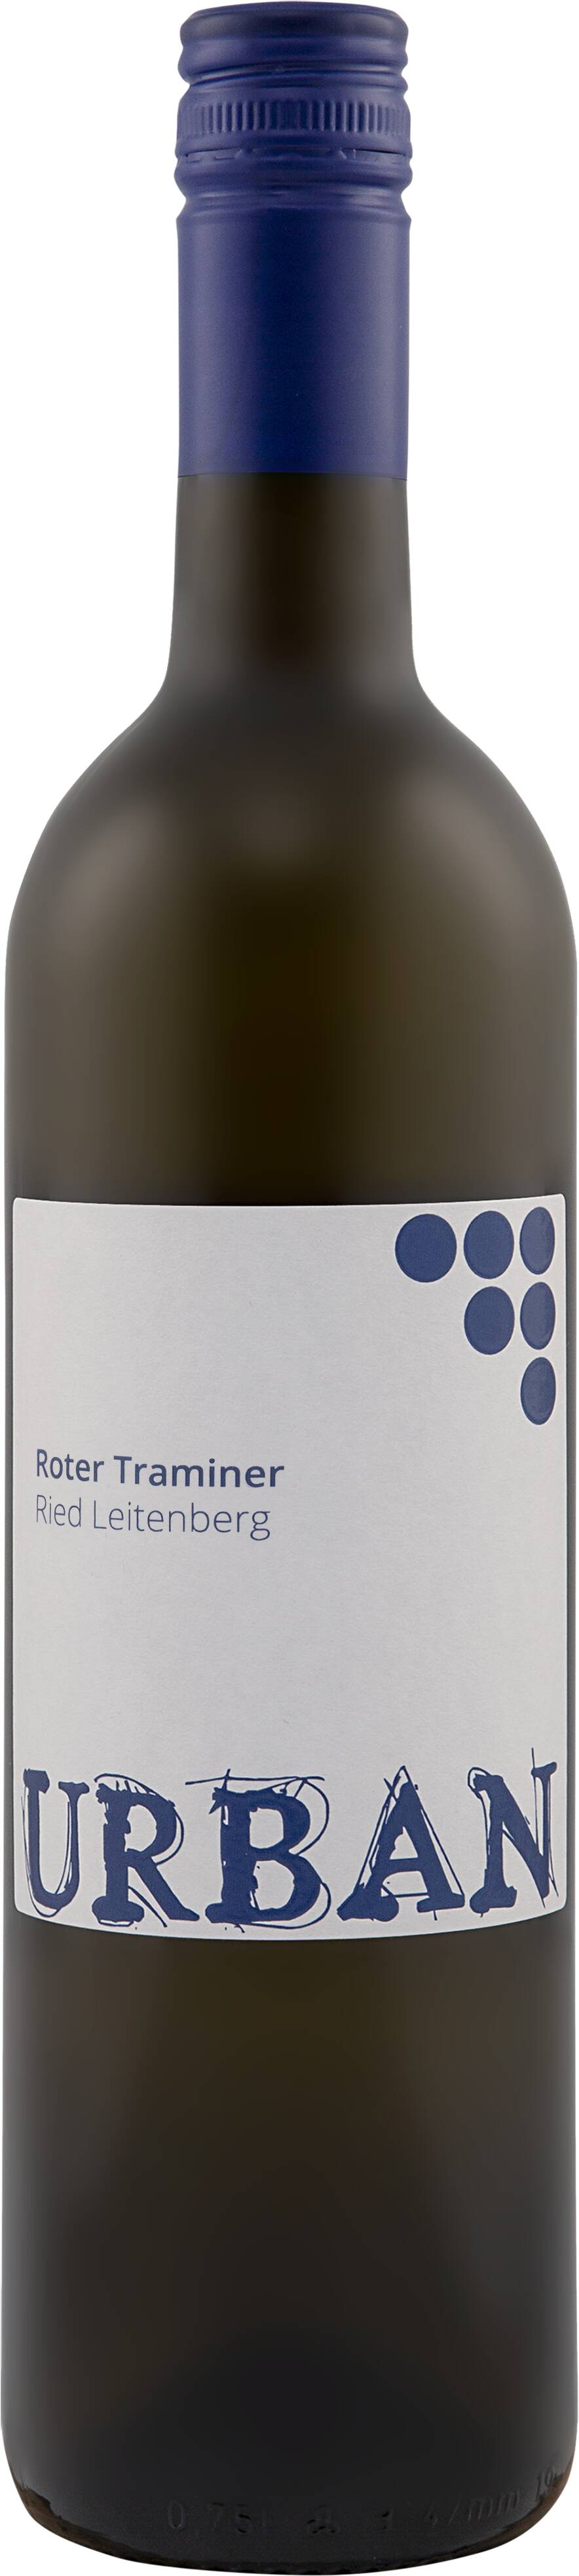 Roter Traminer Ried Leitenberg